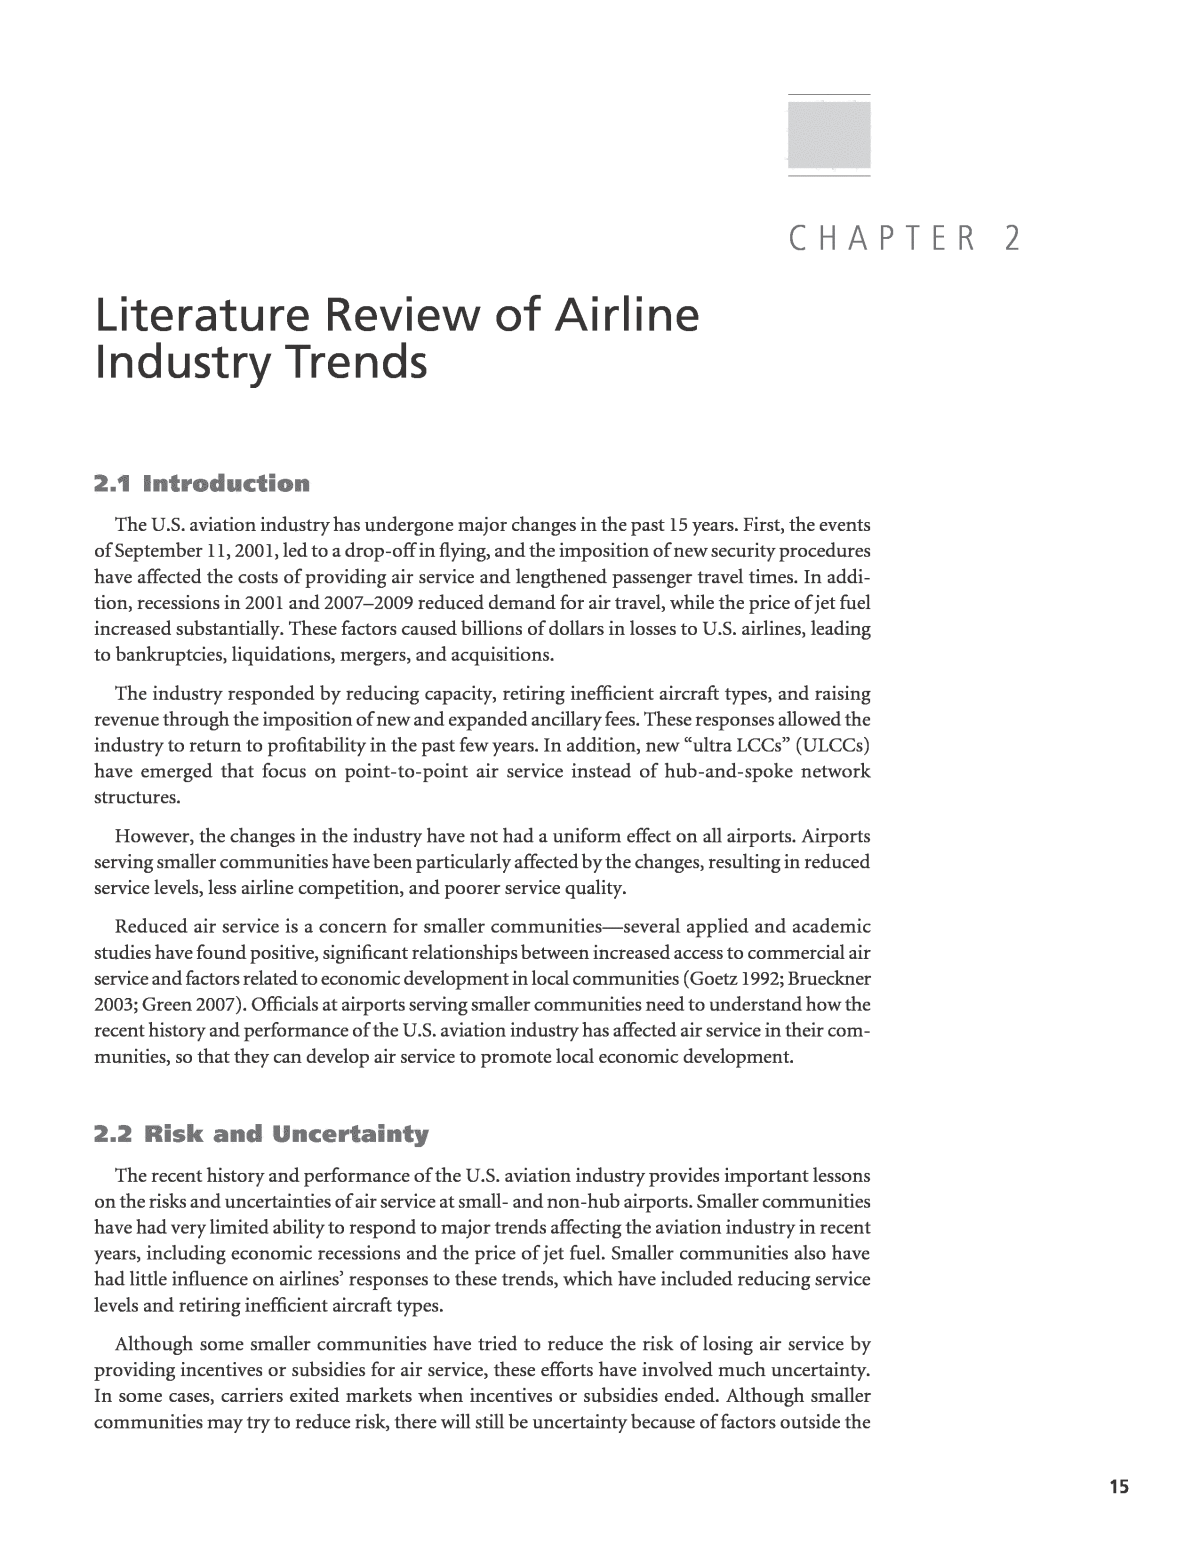 literature review thesis sample